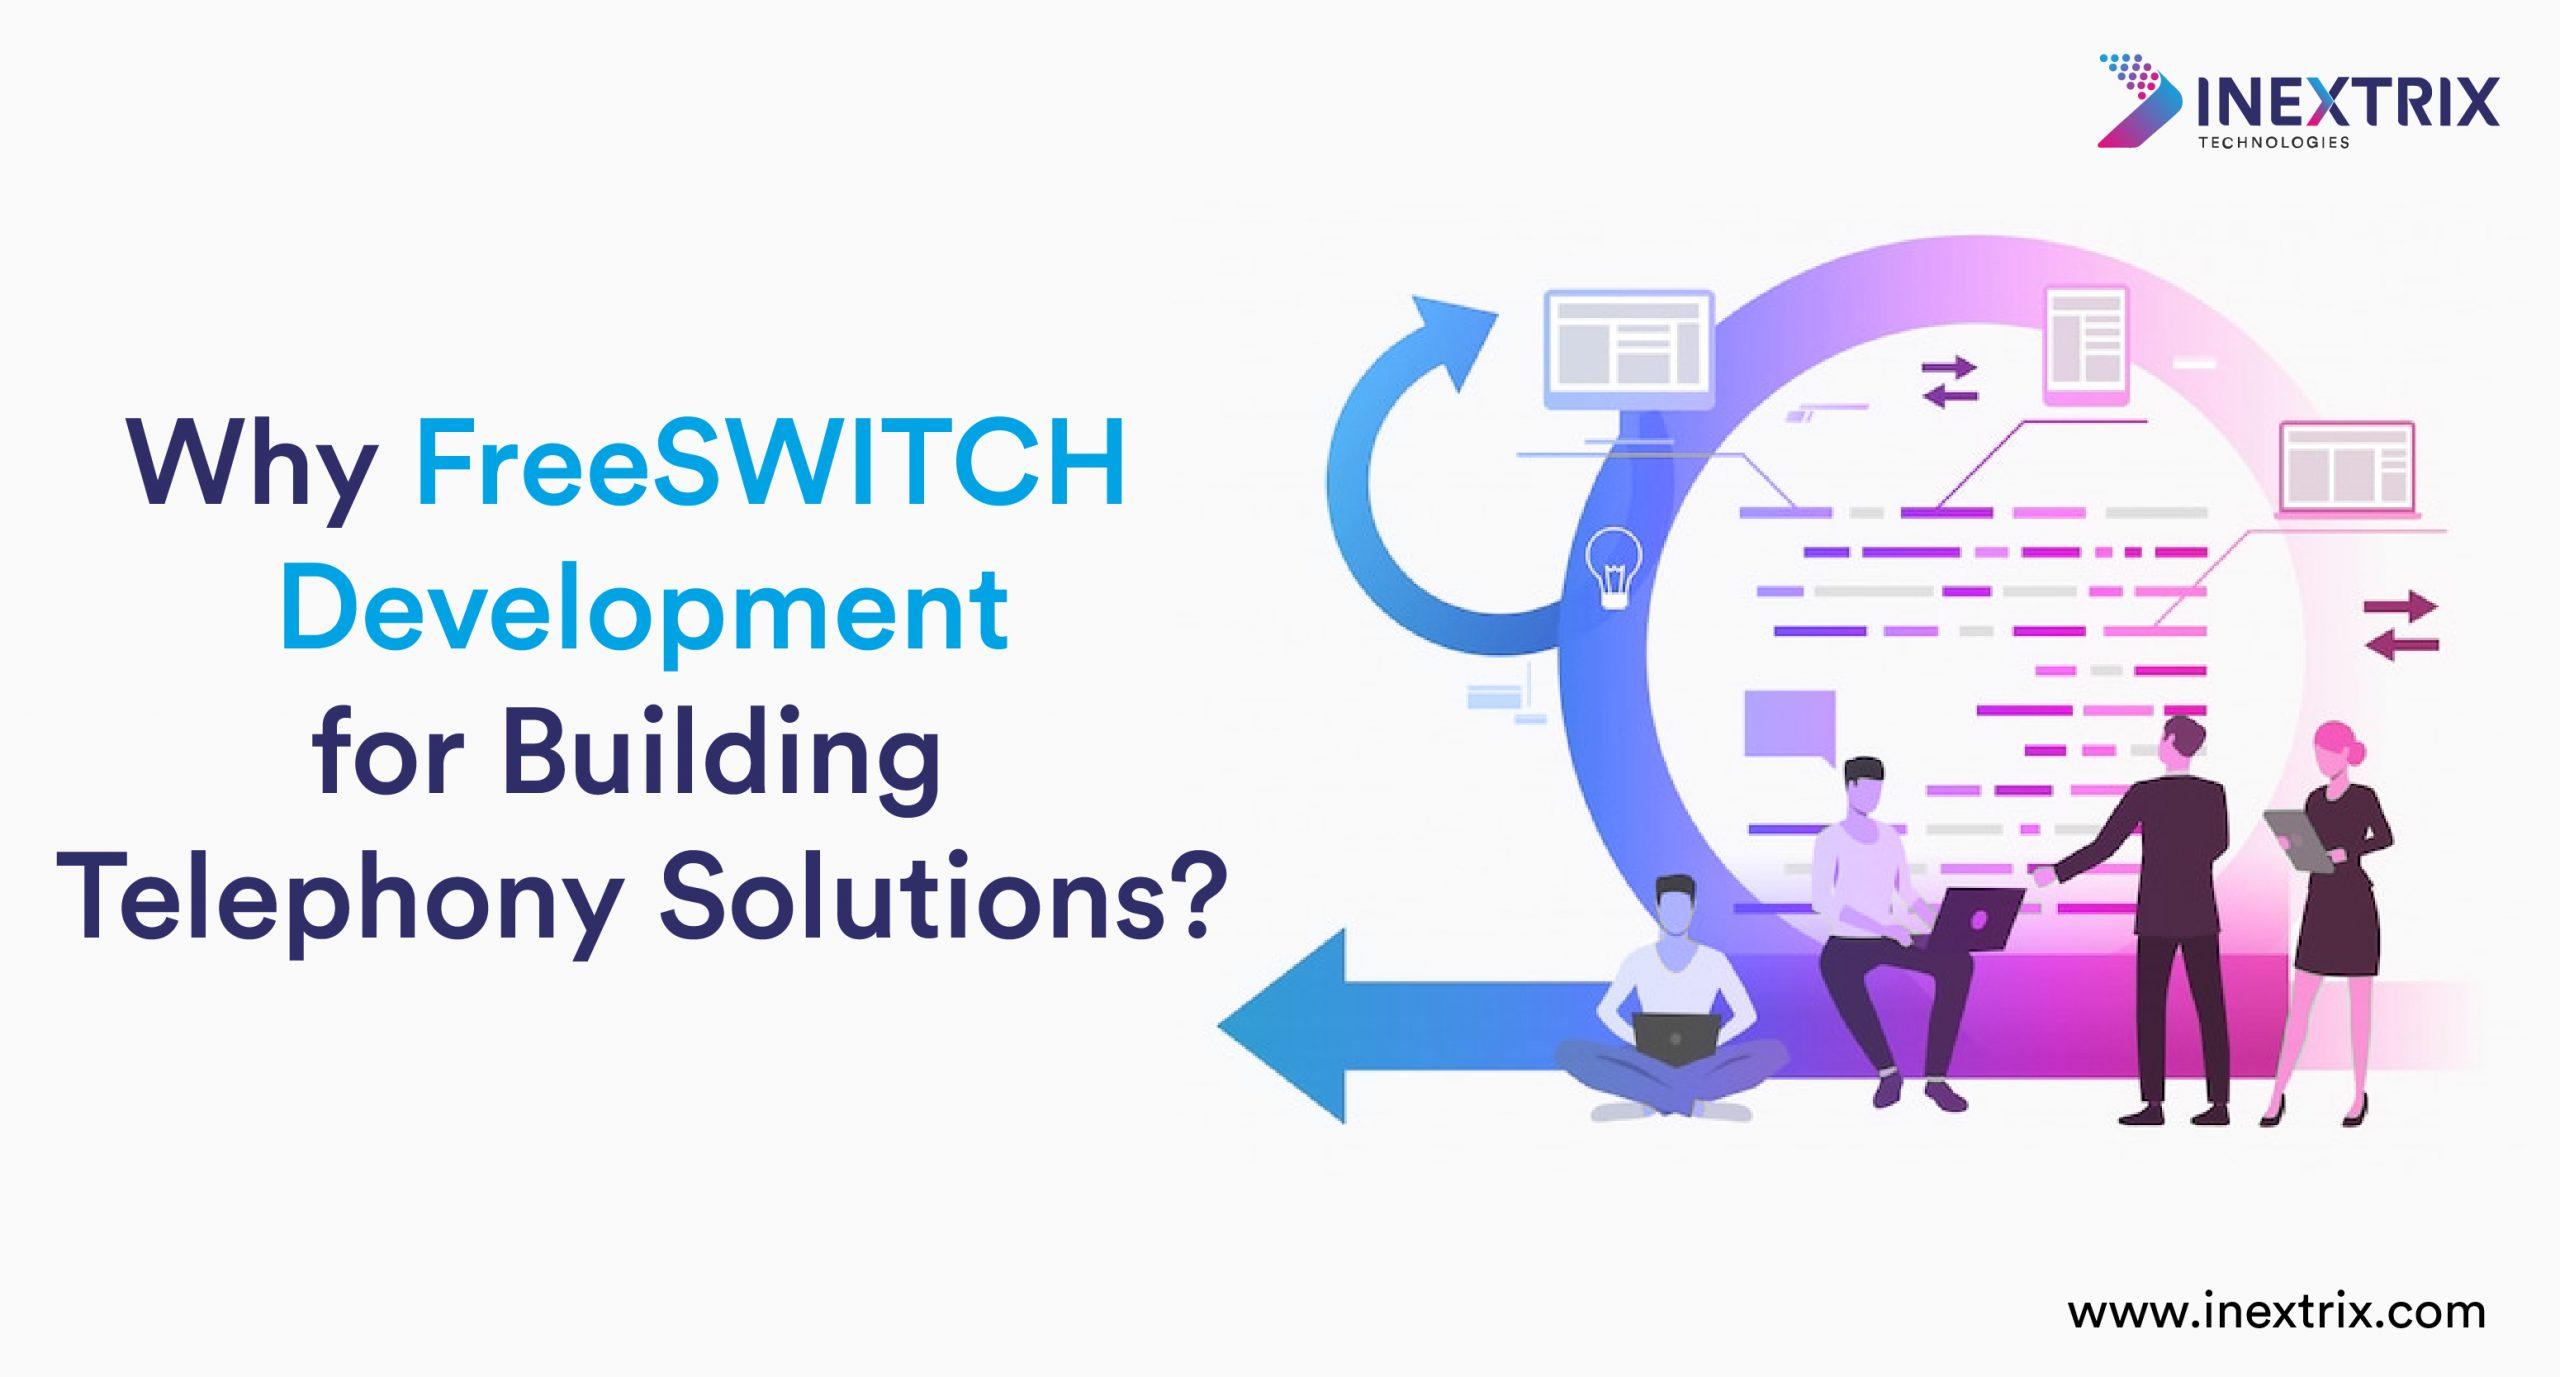 Why FreeSWITCH Development for Building Telephony Solutions